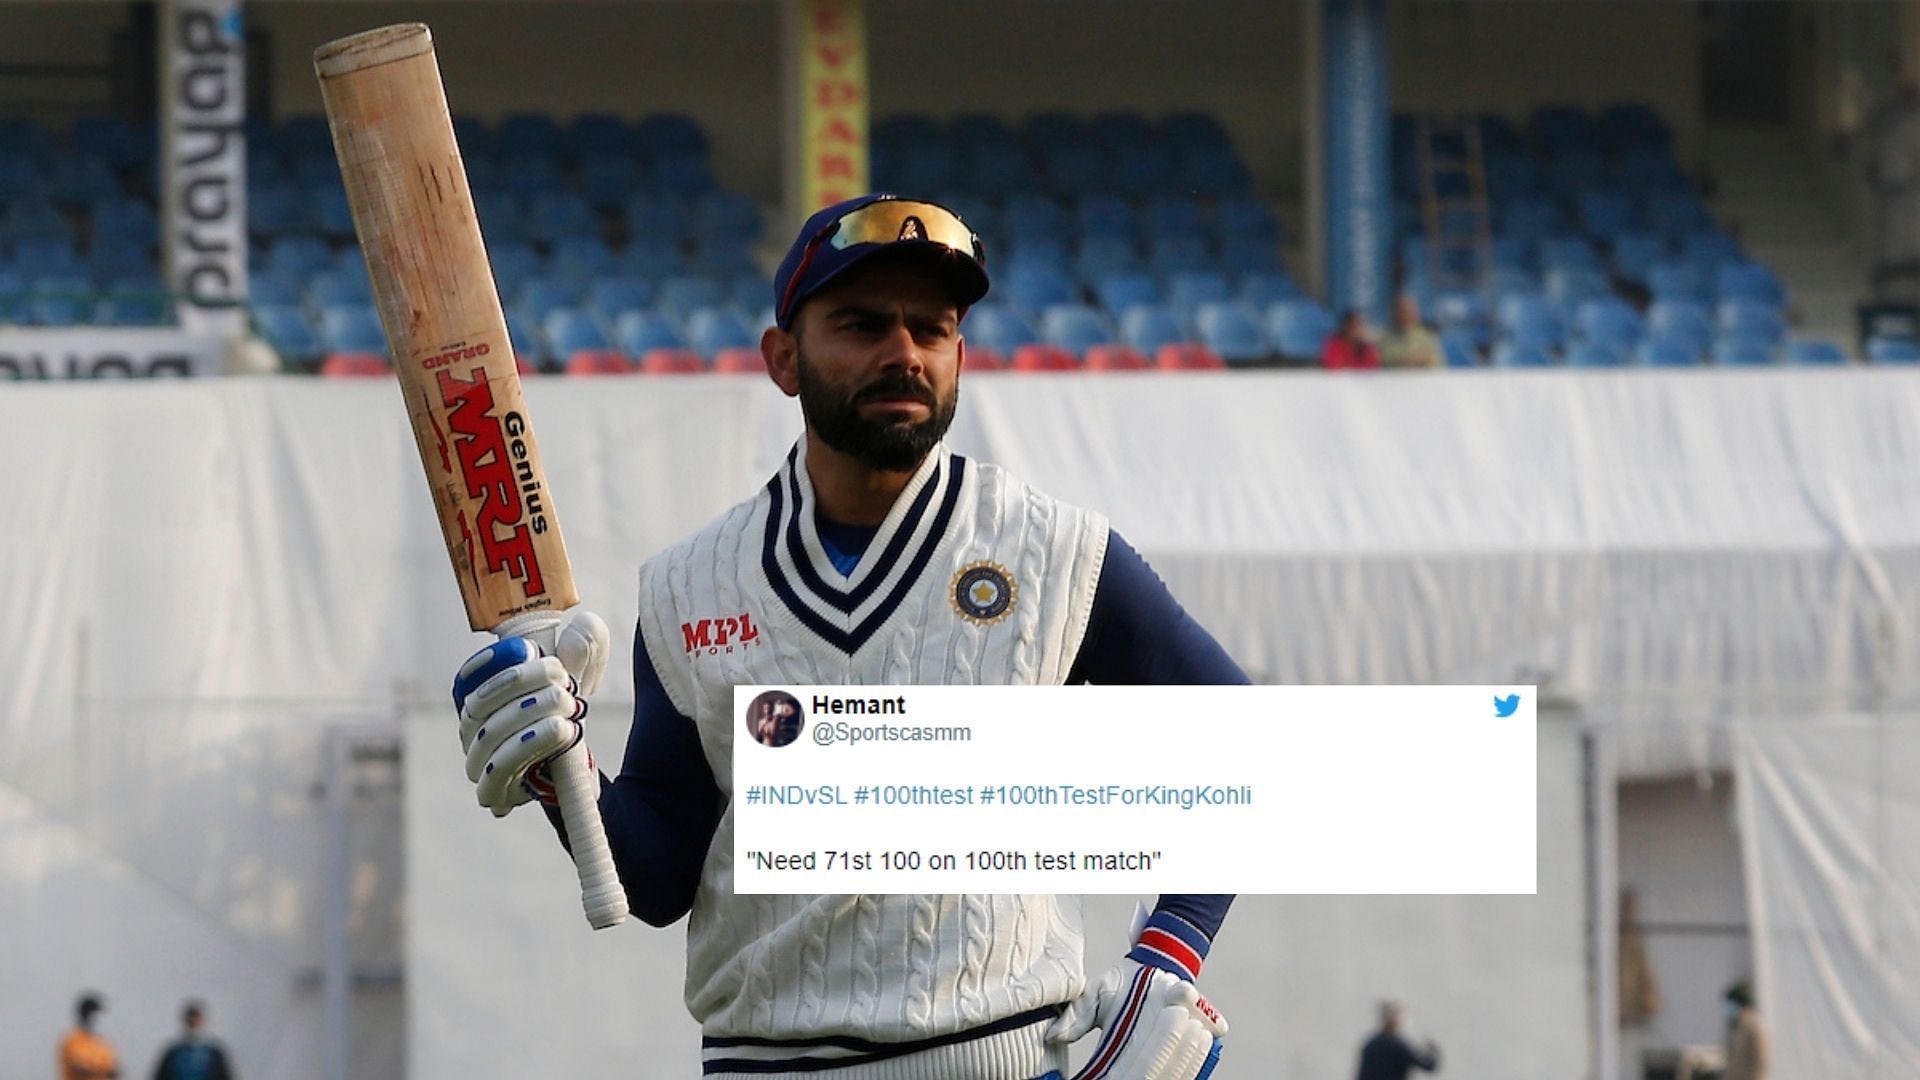 Fans are excited to see Virat Kohli walk out to bat in his 100th Test